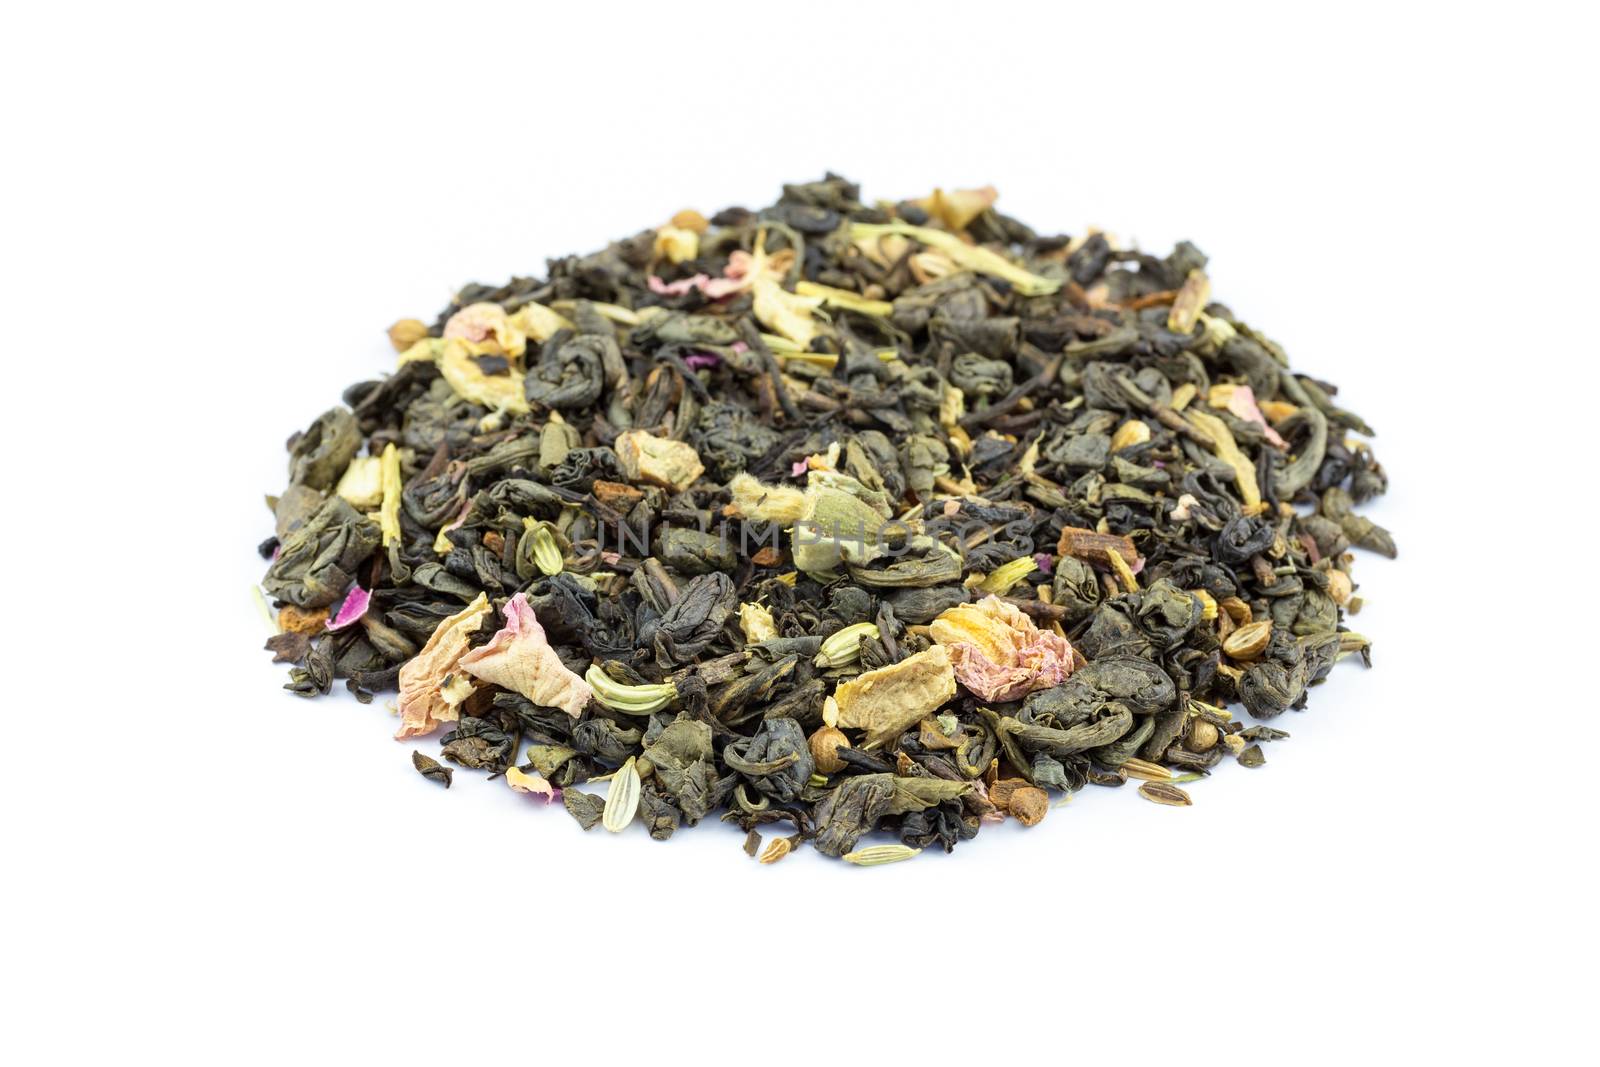 Heap of biological loose Flower Power tea on white by BenSchonewille